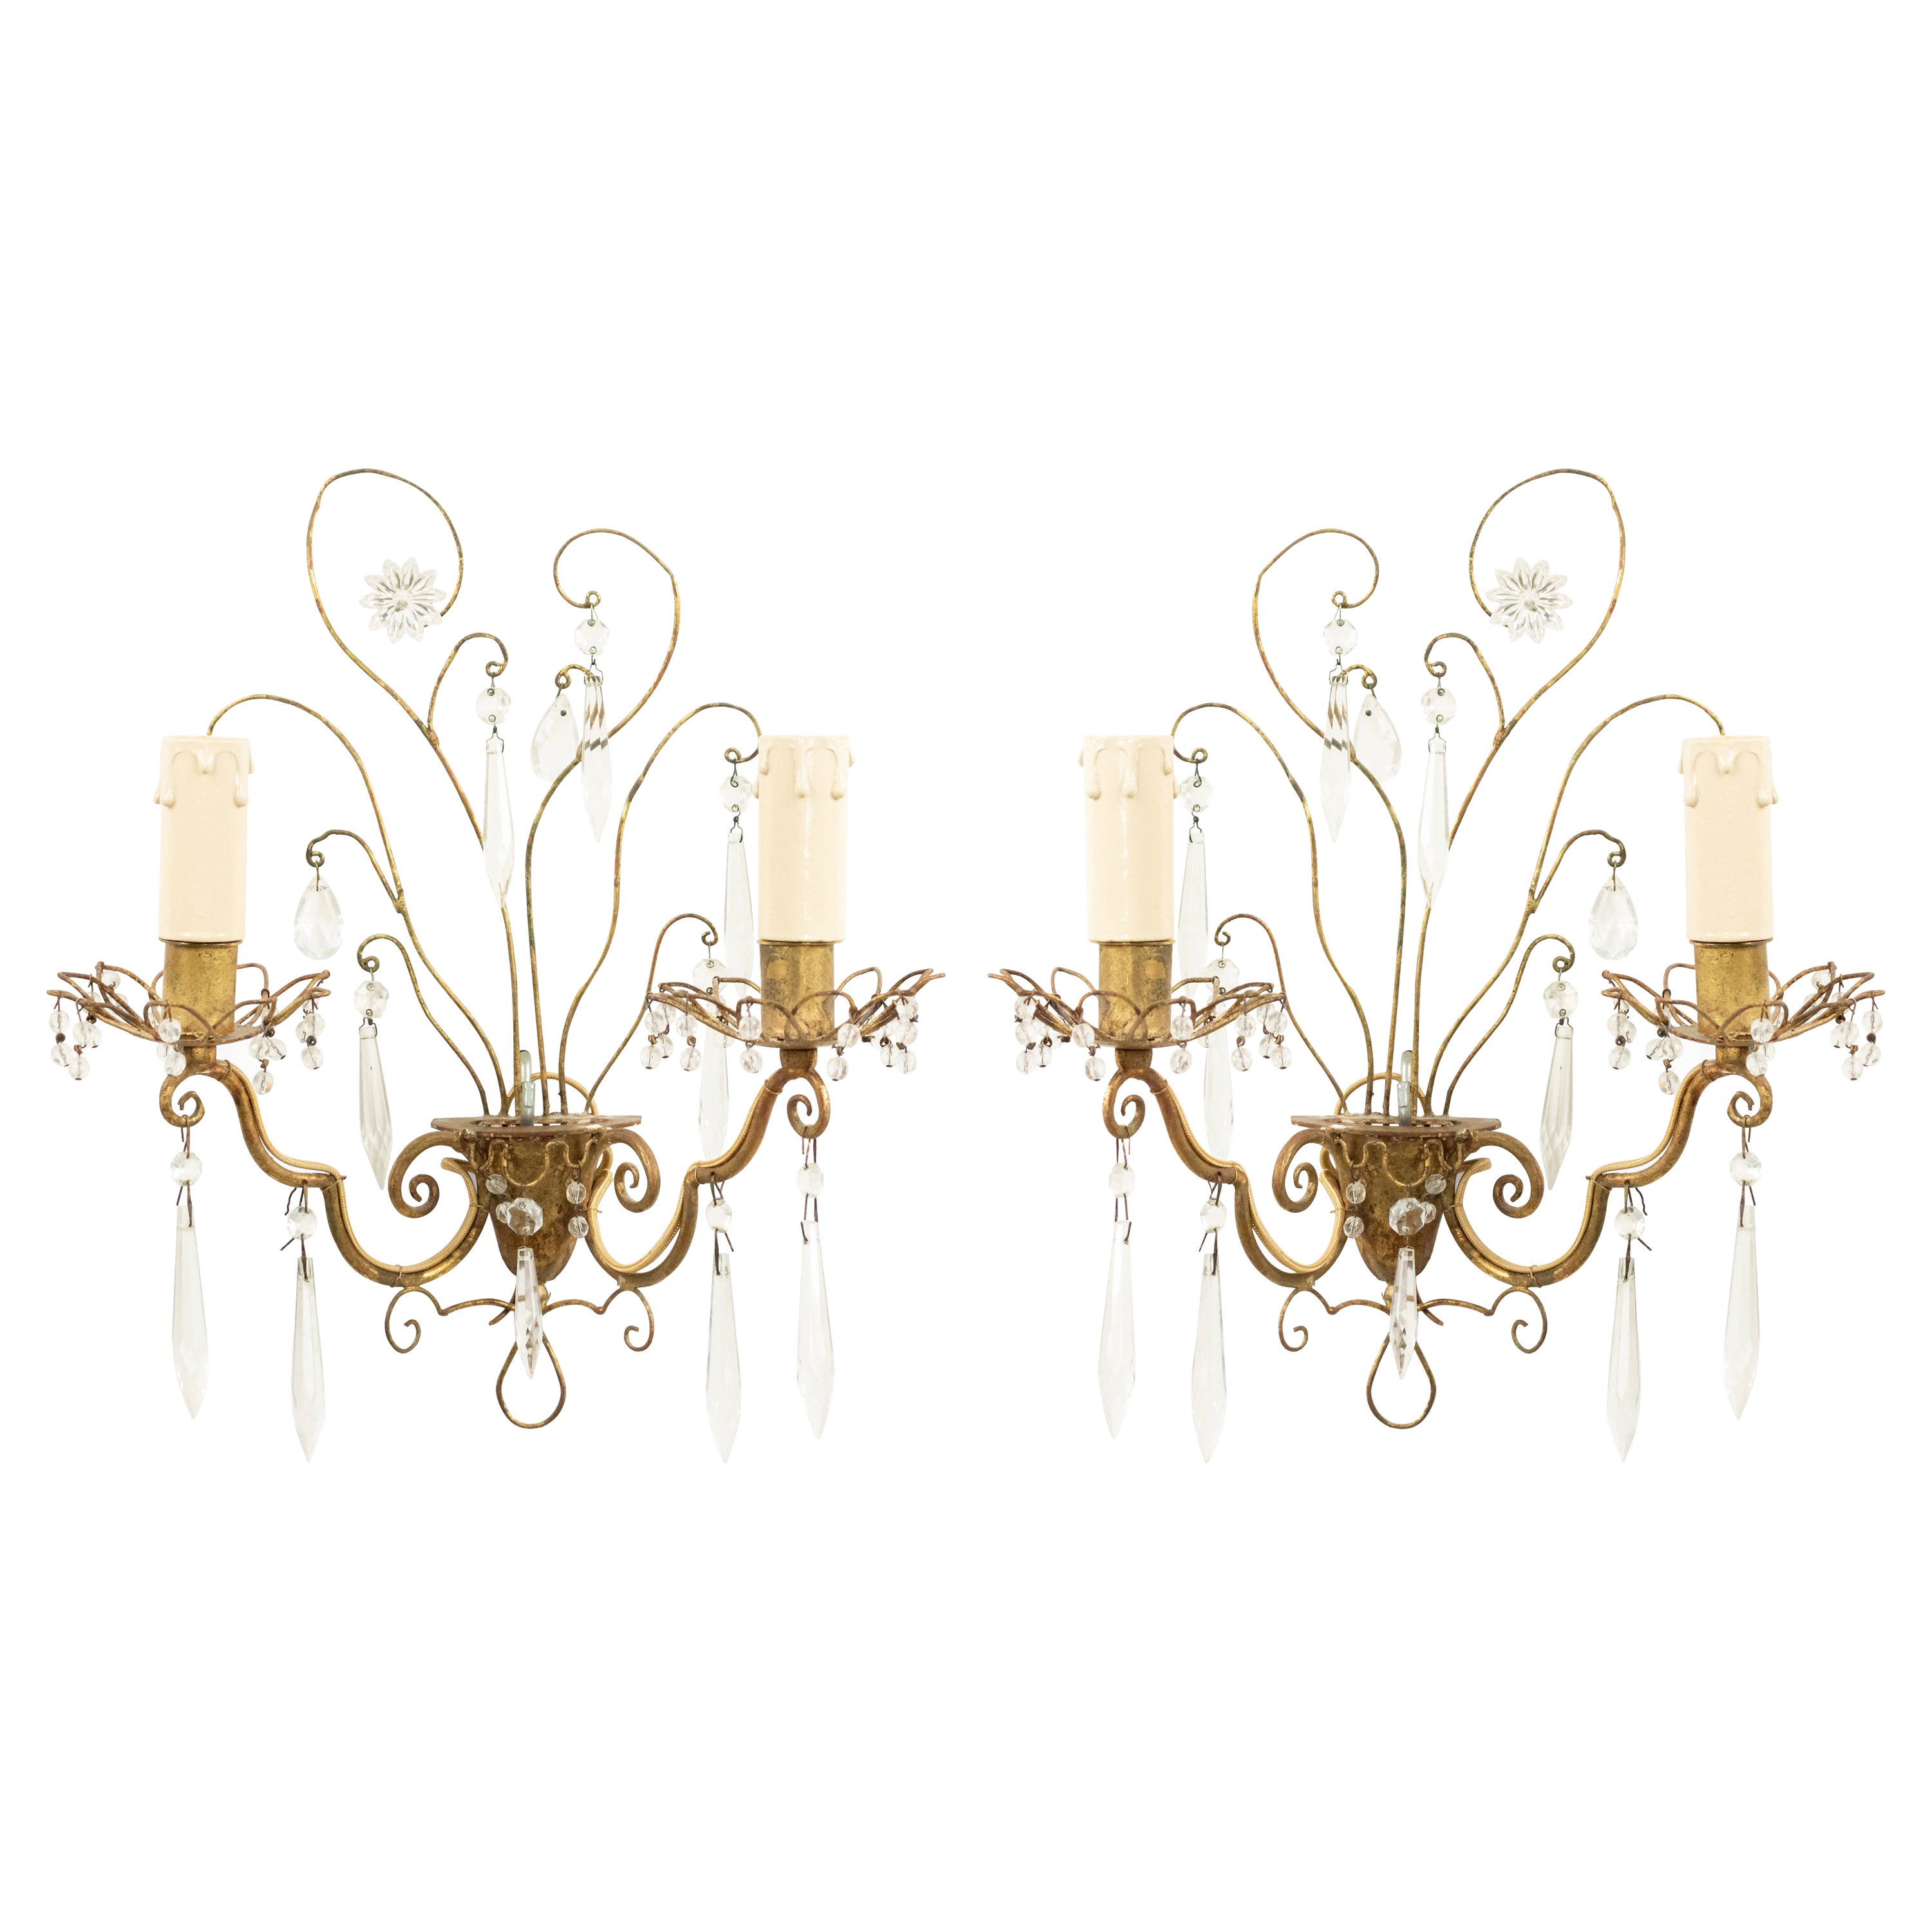 Pair of Maison Bagues French Mid-Century Gilt Metal Wall Sconces